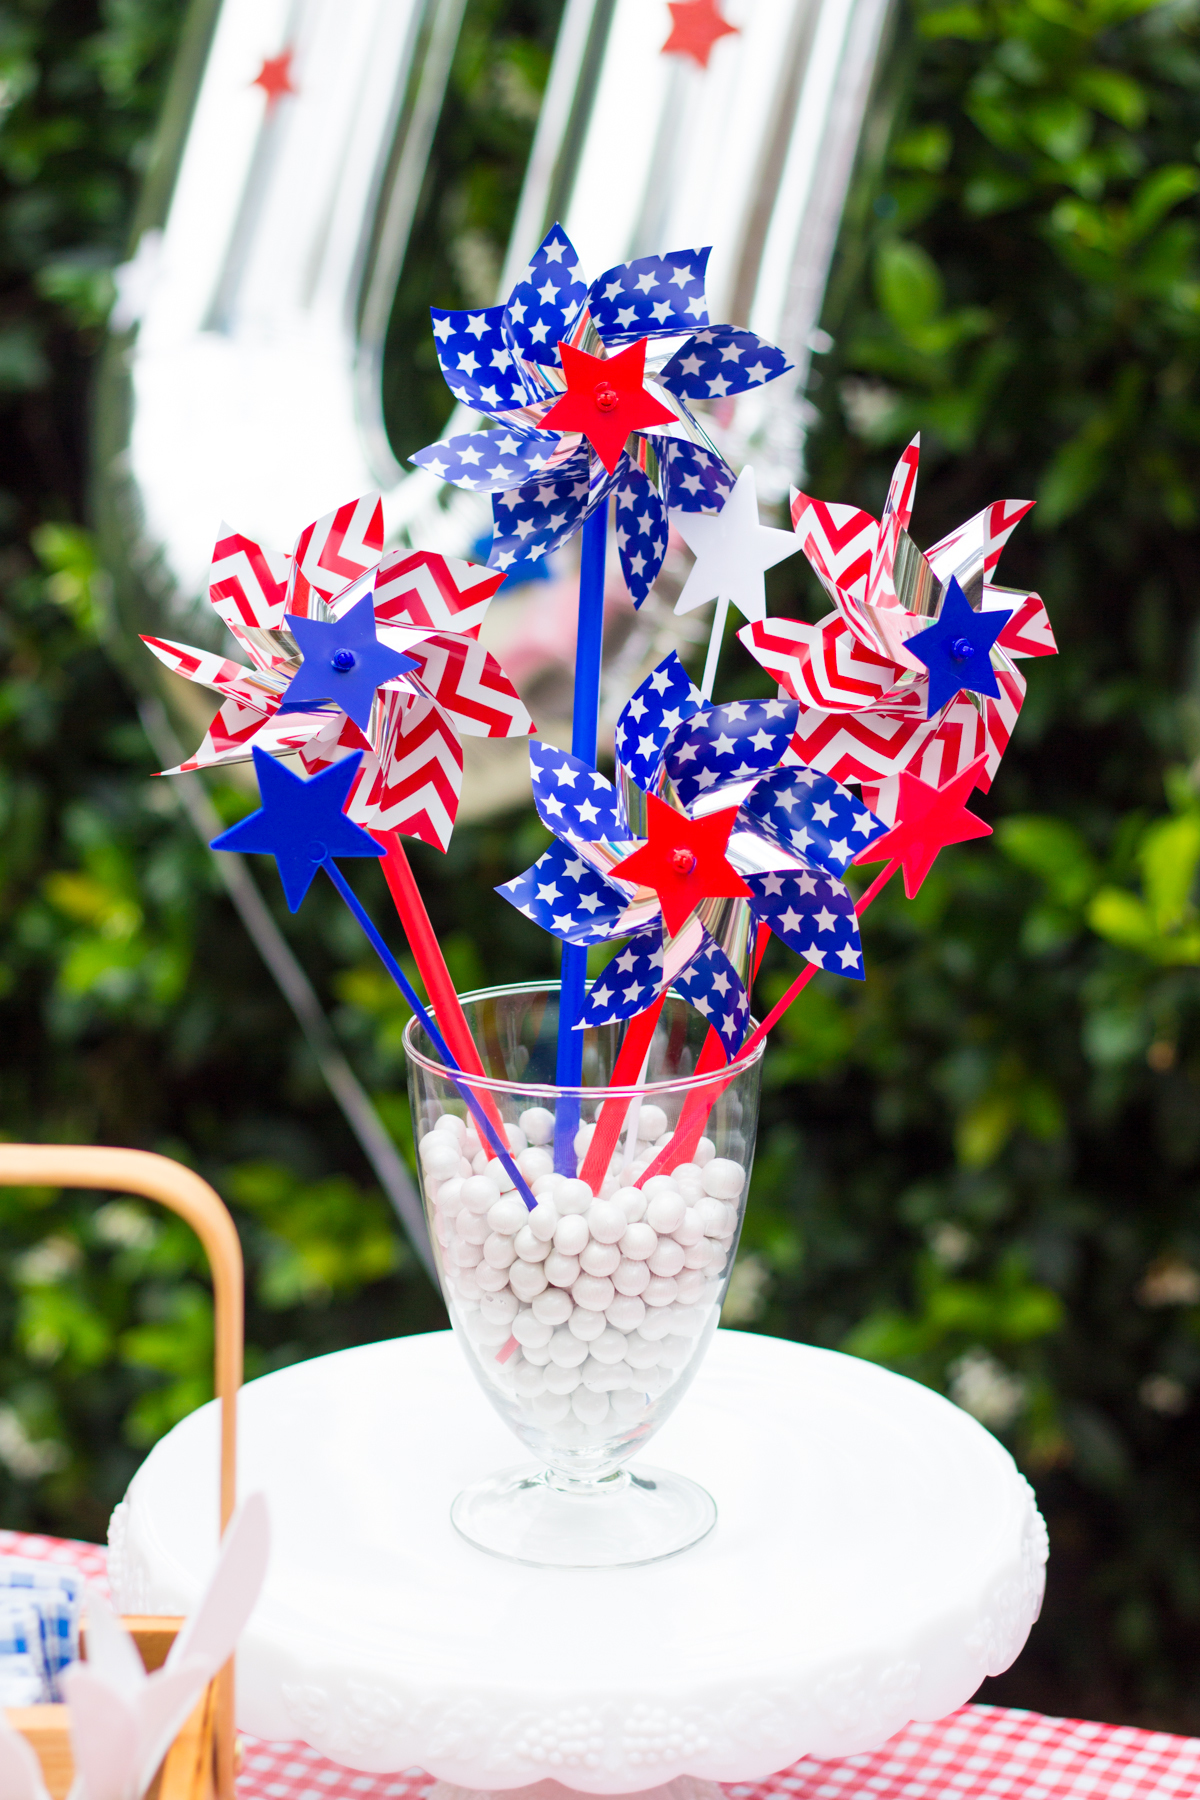 Patriotic Baseball Décor: This Easy DIY July 4th Centerpiece Will